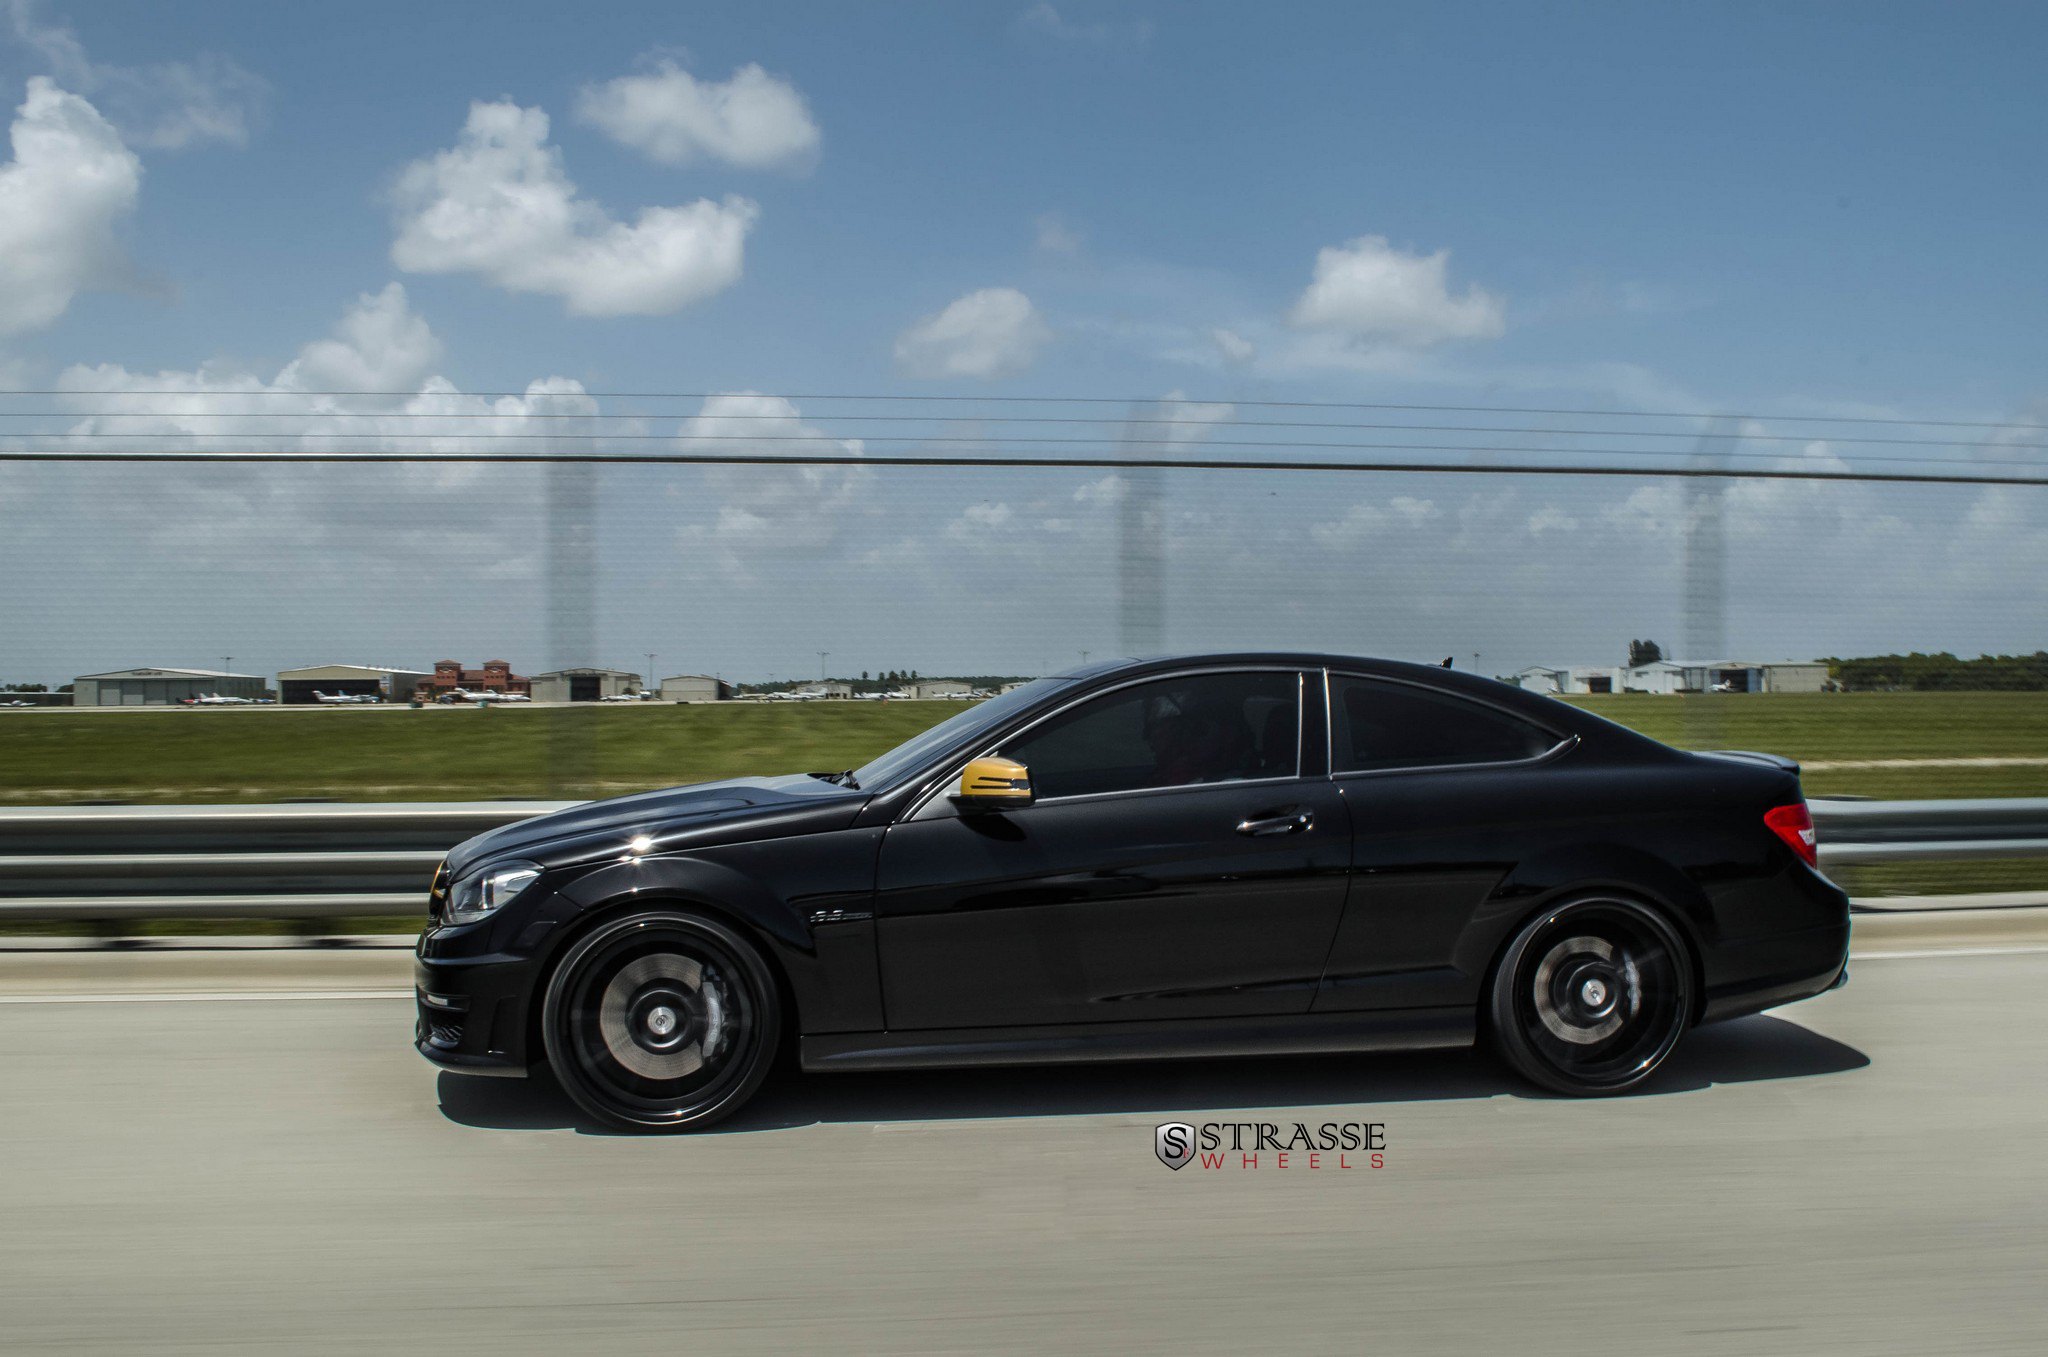 Strasse Wheels on Black Mercedes C-Class - Photo by Strasse Forged